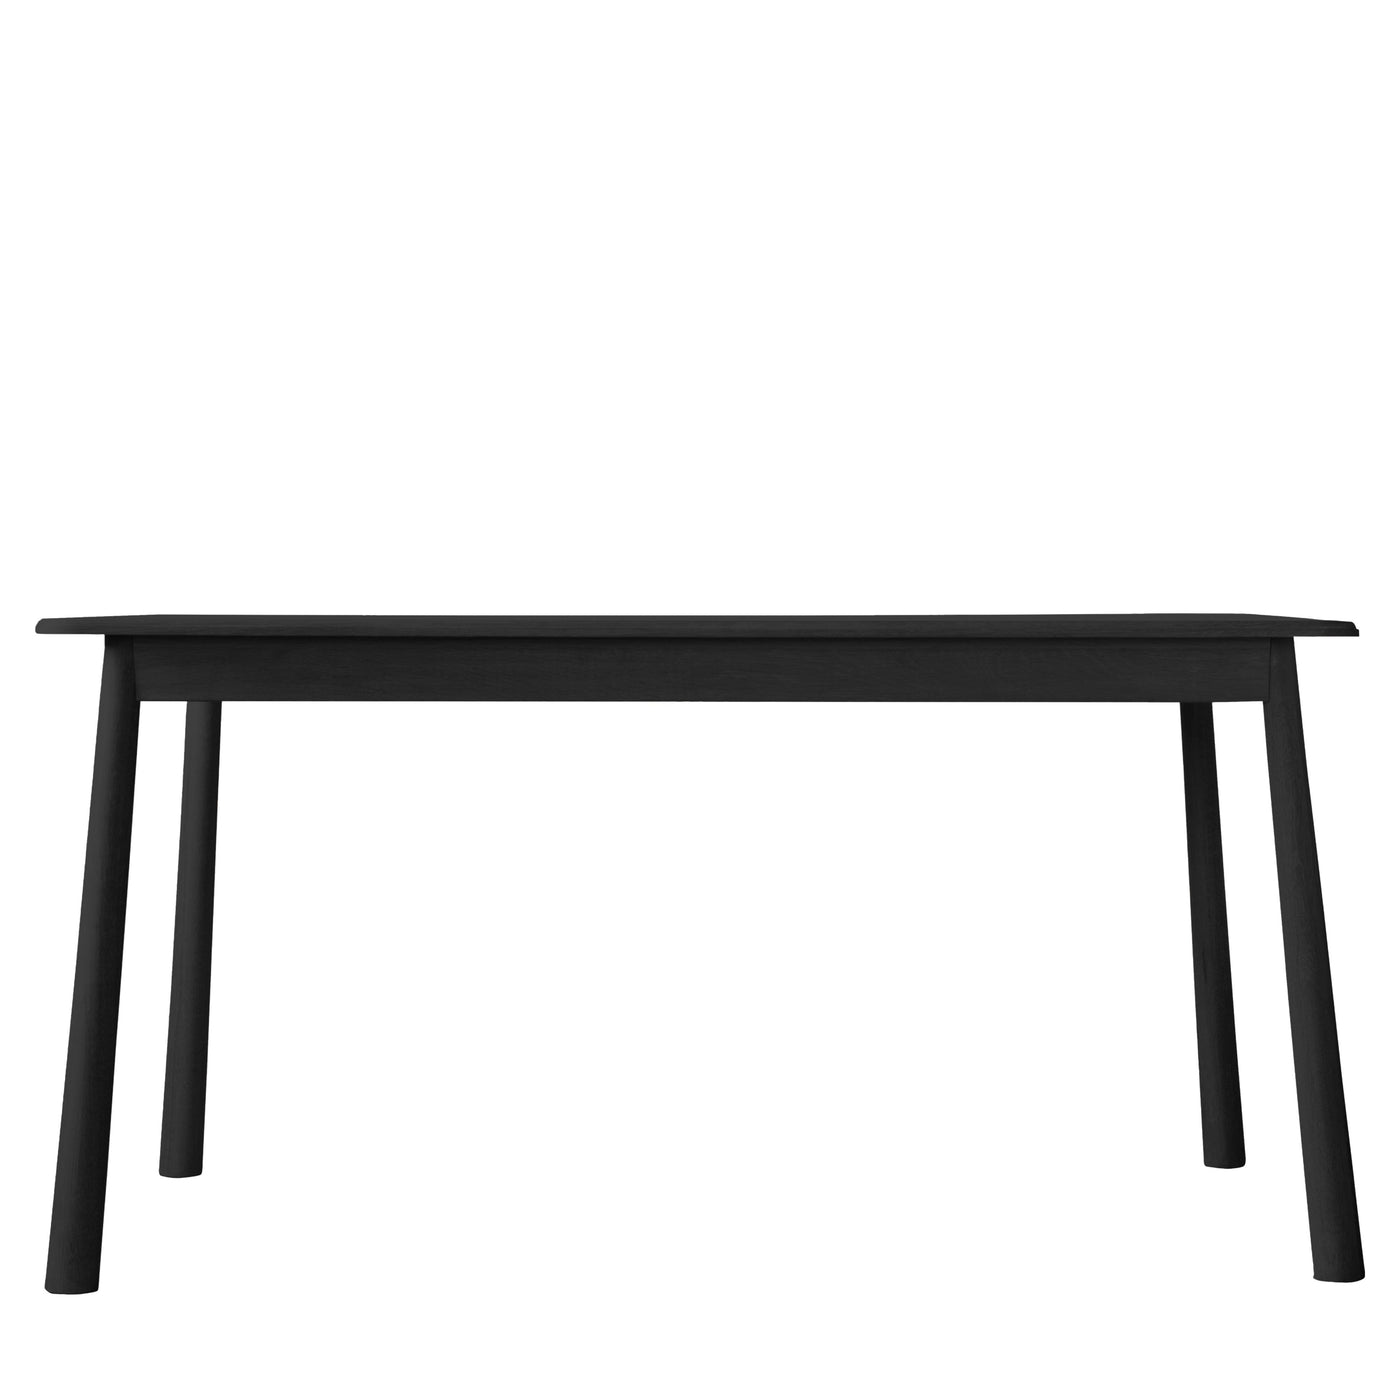 Highridge Dining Table - Black | OUTLET